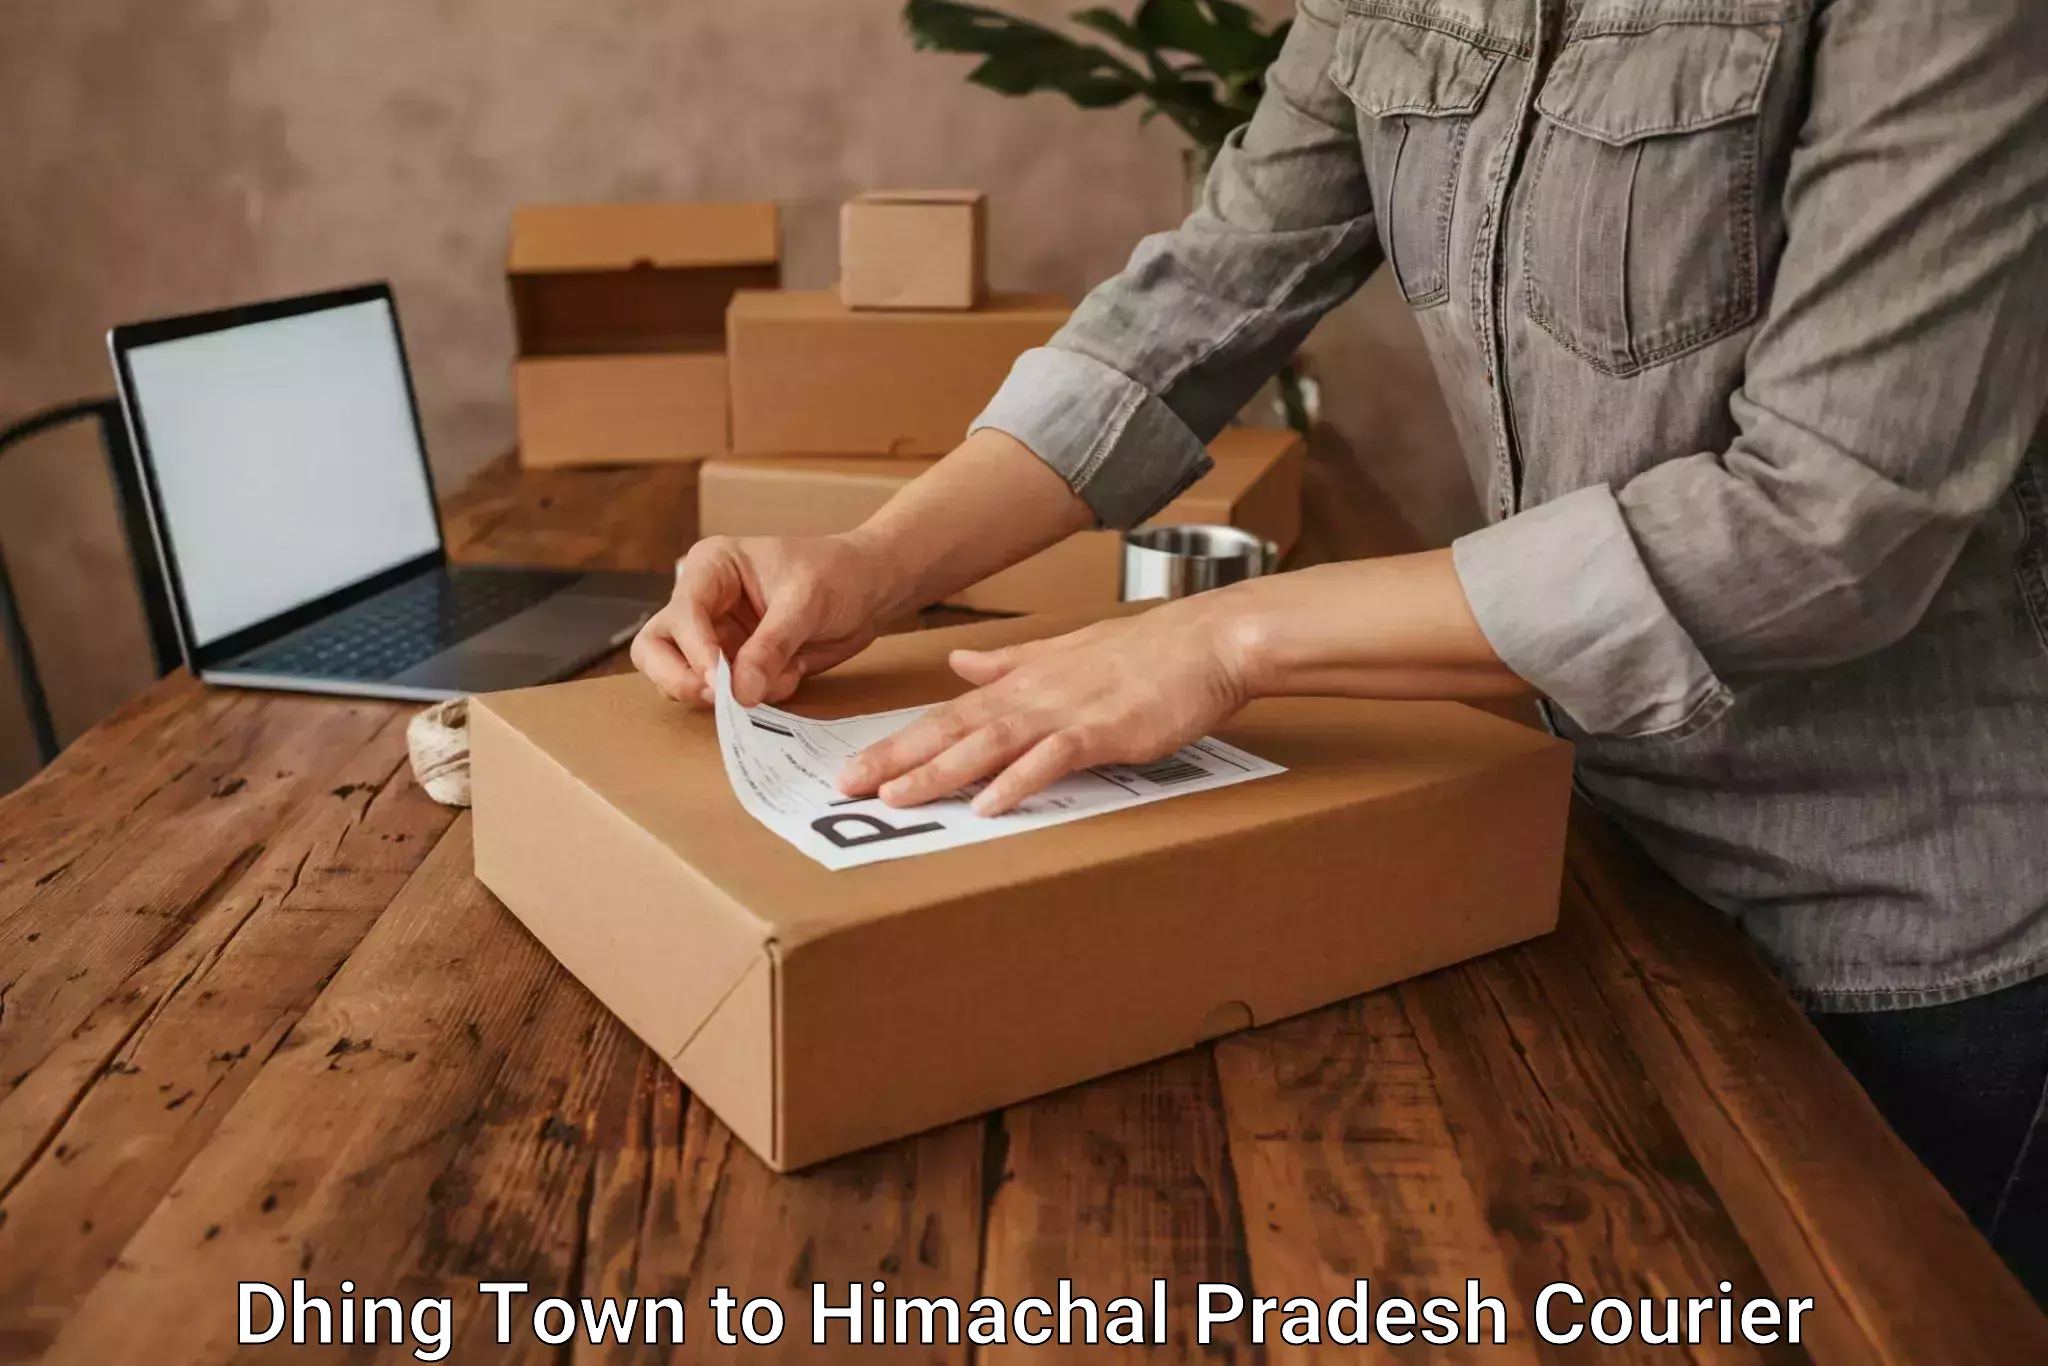 Same-day delivery options Dhing Town to Una Himachal Pradesh